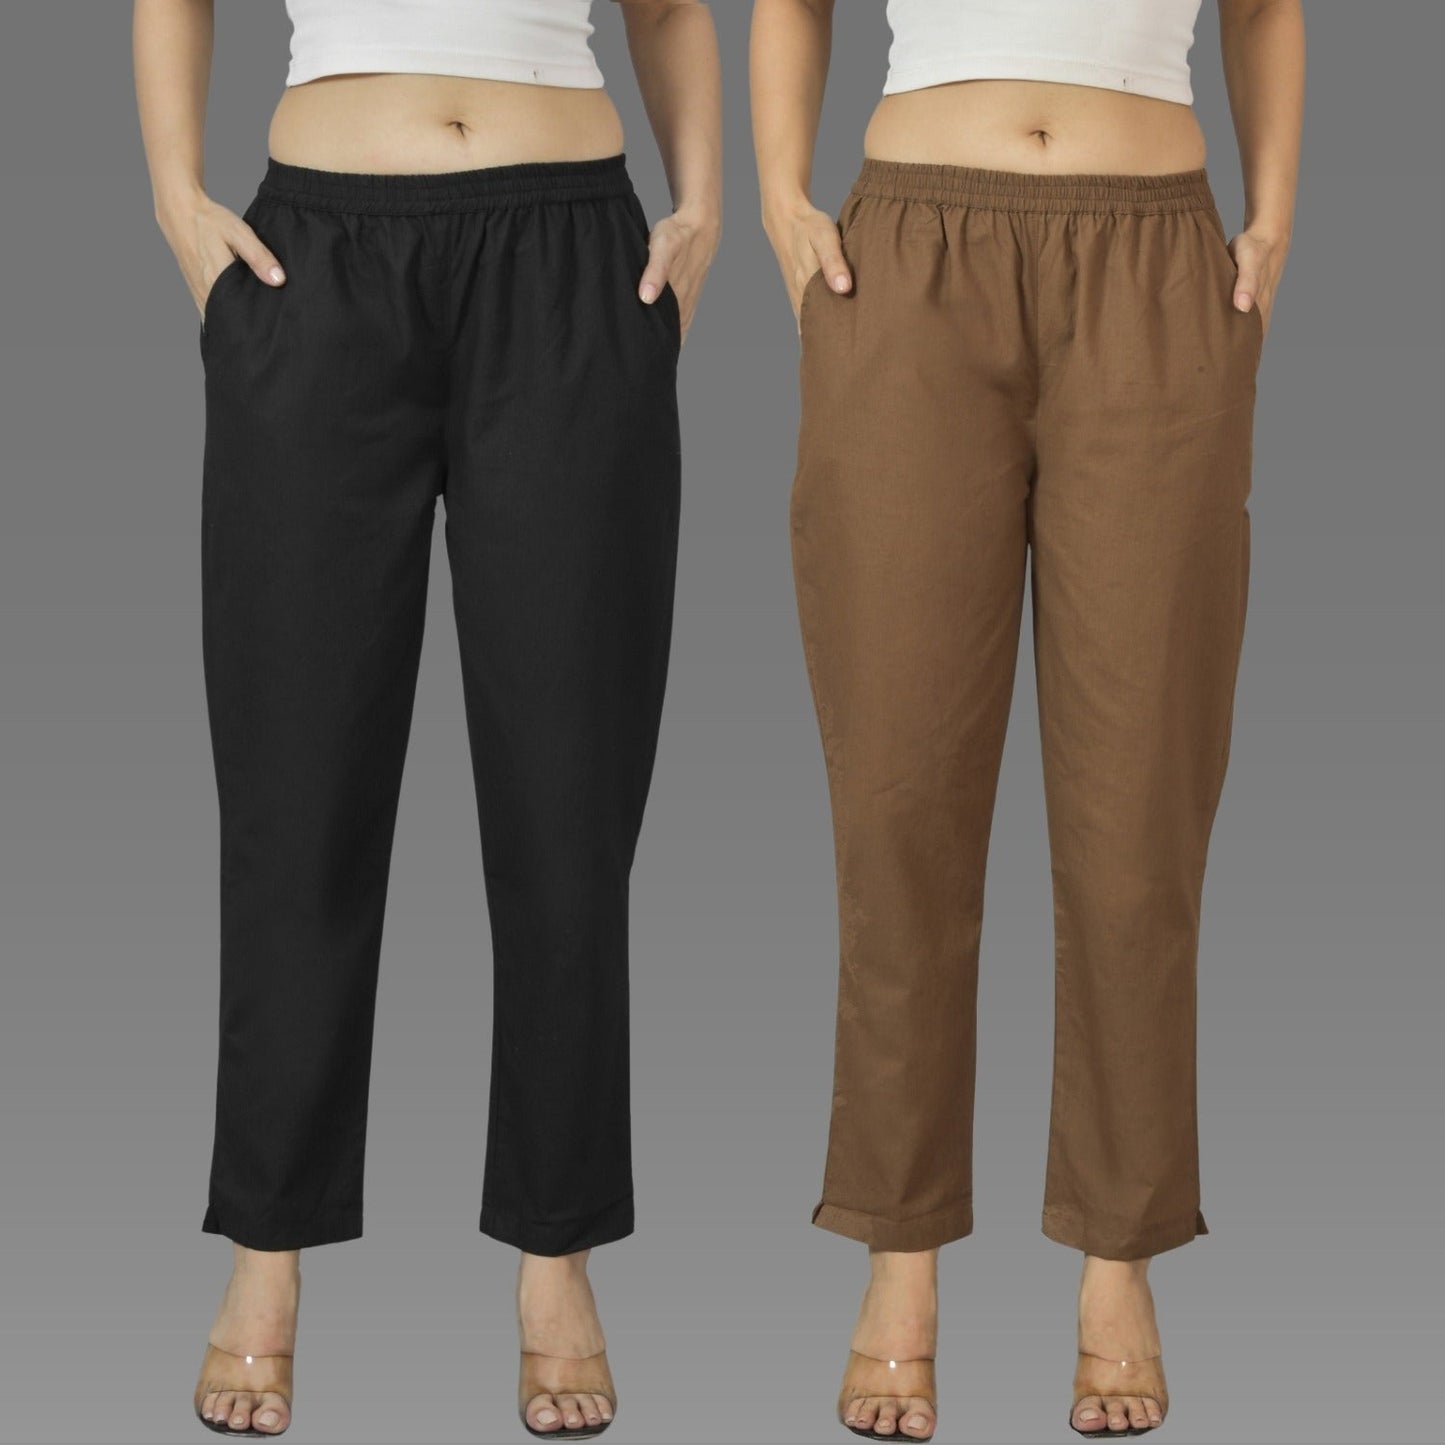 Pack Of 2 Womens Black And Brown Deep Pocket Fully Elastic Cotton Trouser